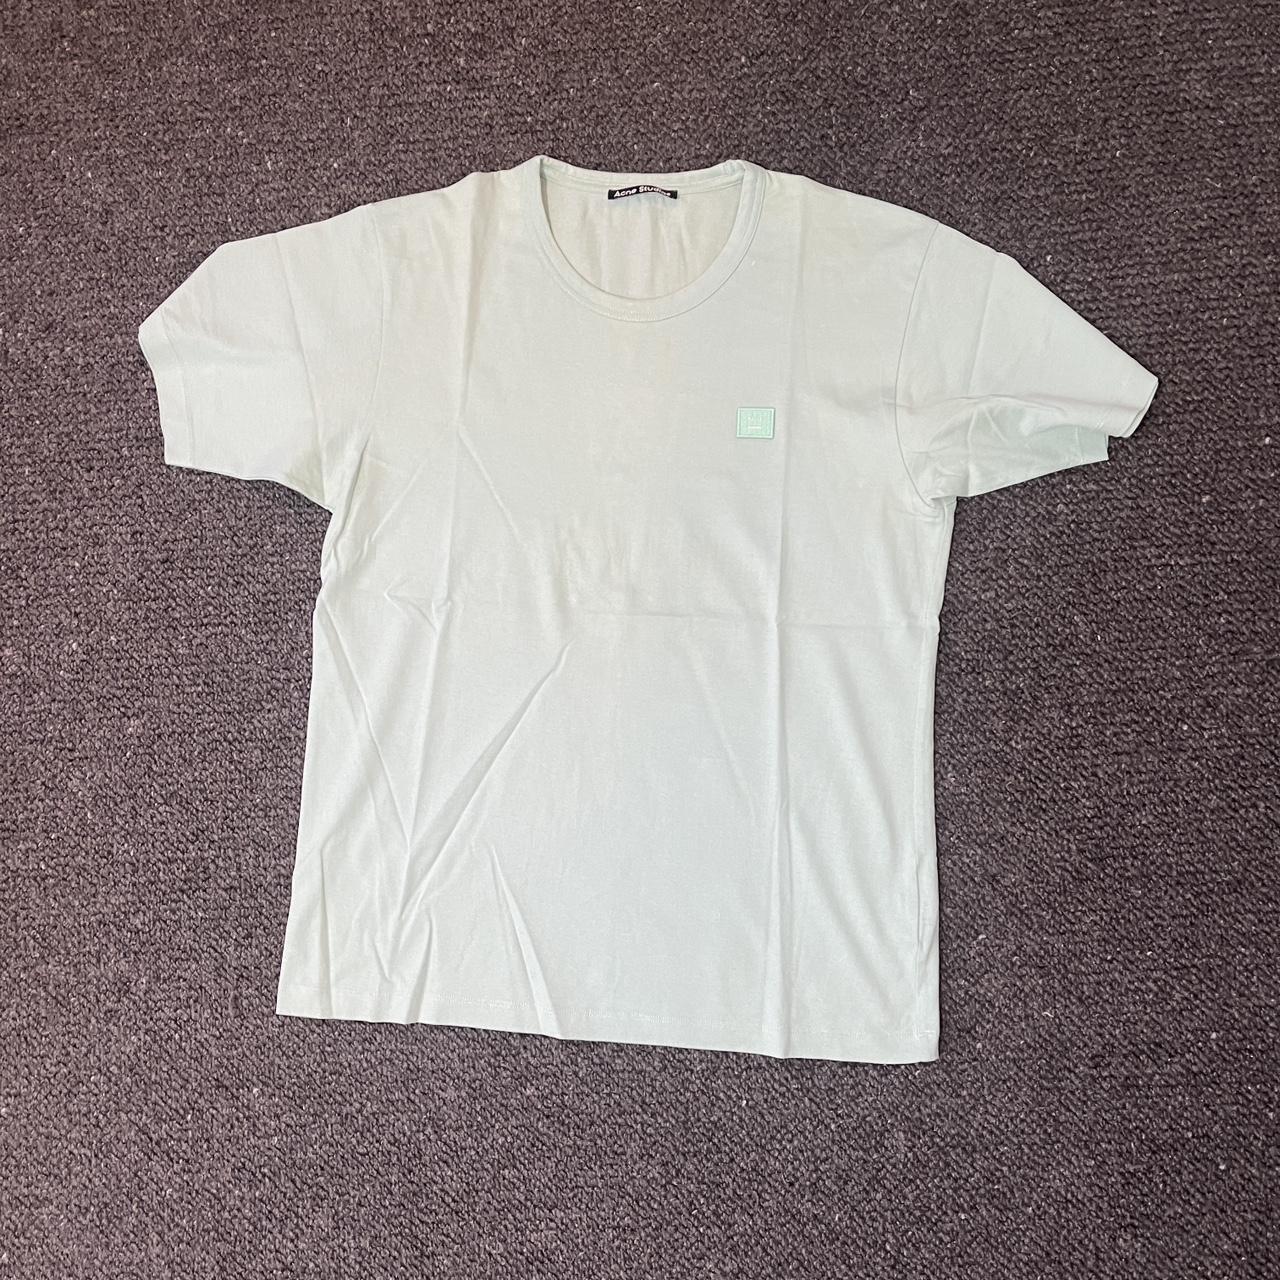 Acne Studio Face tee Mint Colour small stain on... - Depop